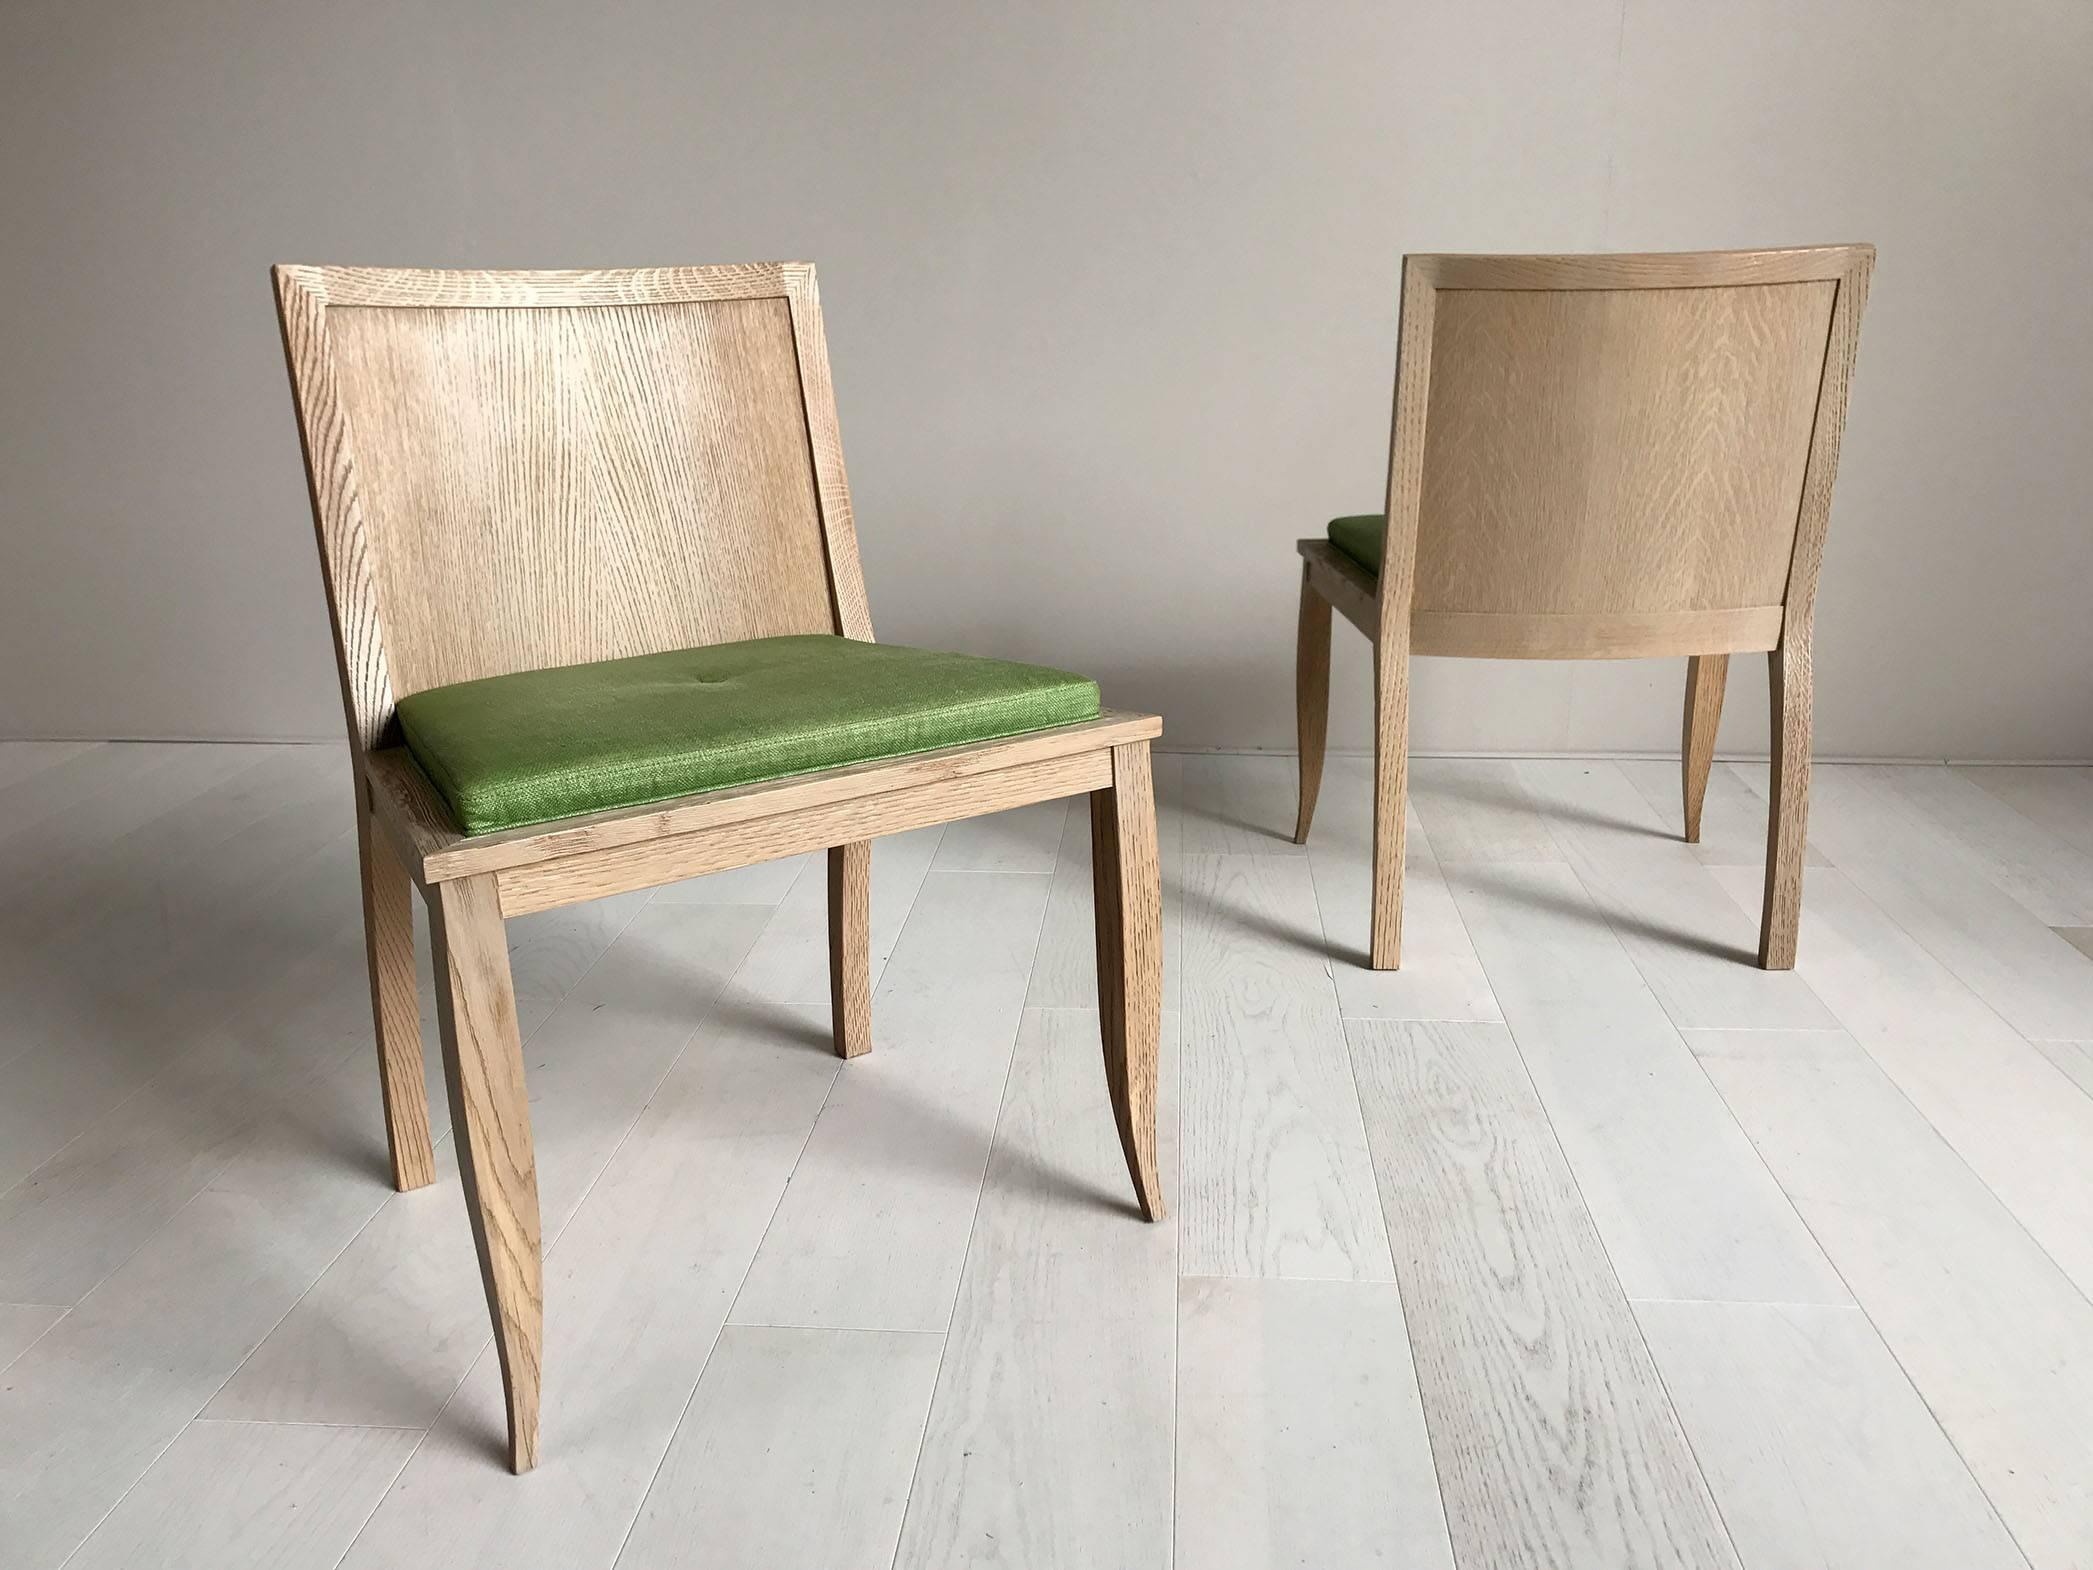 Philippe Delzers for Elitis, pair of chairs L'Ange Bleu, France, 1998.
Structure in bleached oak and sandblasted, seat in green linen. Signed under the seat.
Provenance: Personal collection of Phillipe Delzers.